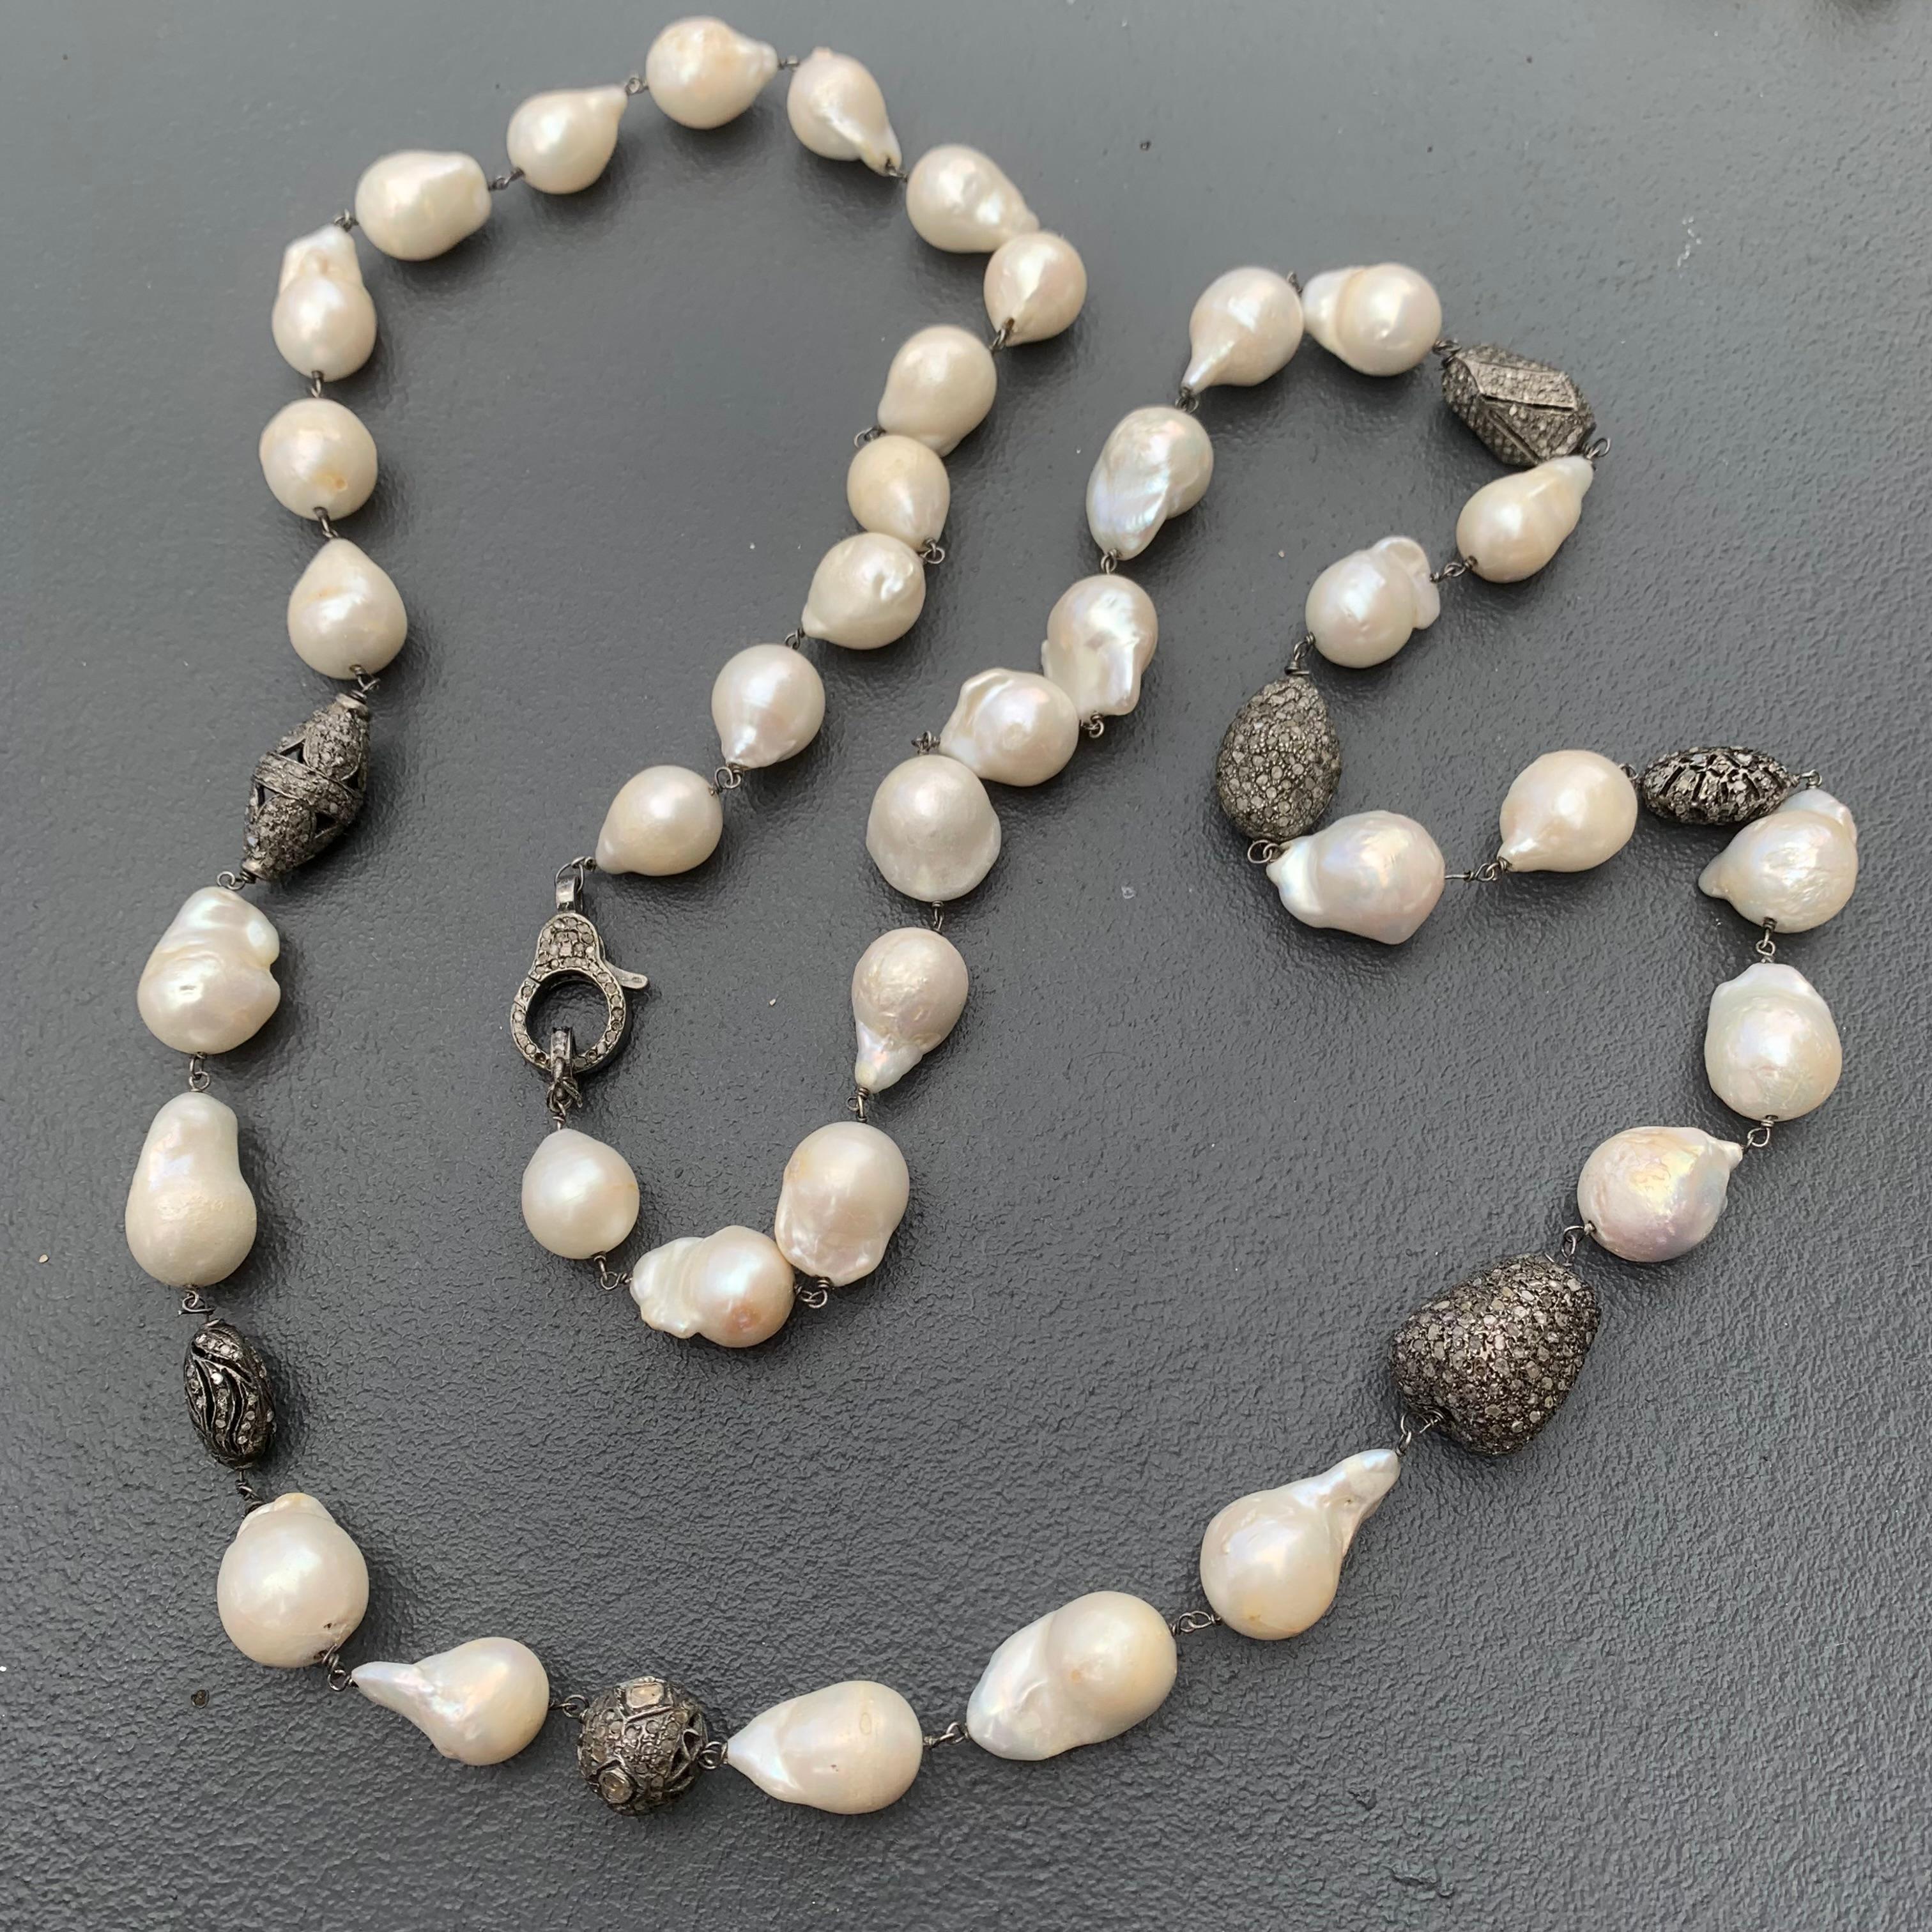 Long Very well made Estate large Baroque Pearls with Silver Pave Diamond Bead necklace . Lobster clasp also has pave diamonds set in silver .  Contemporary with twist to a timeless strand of classic pearls necklace . 
 All beads are hand wired .